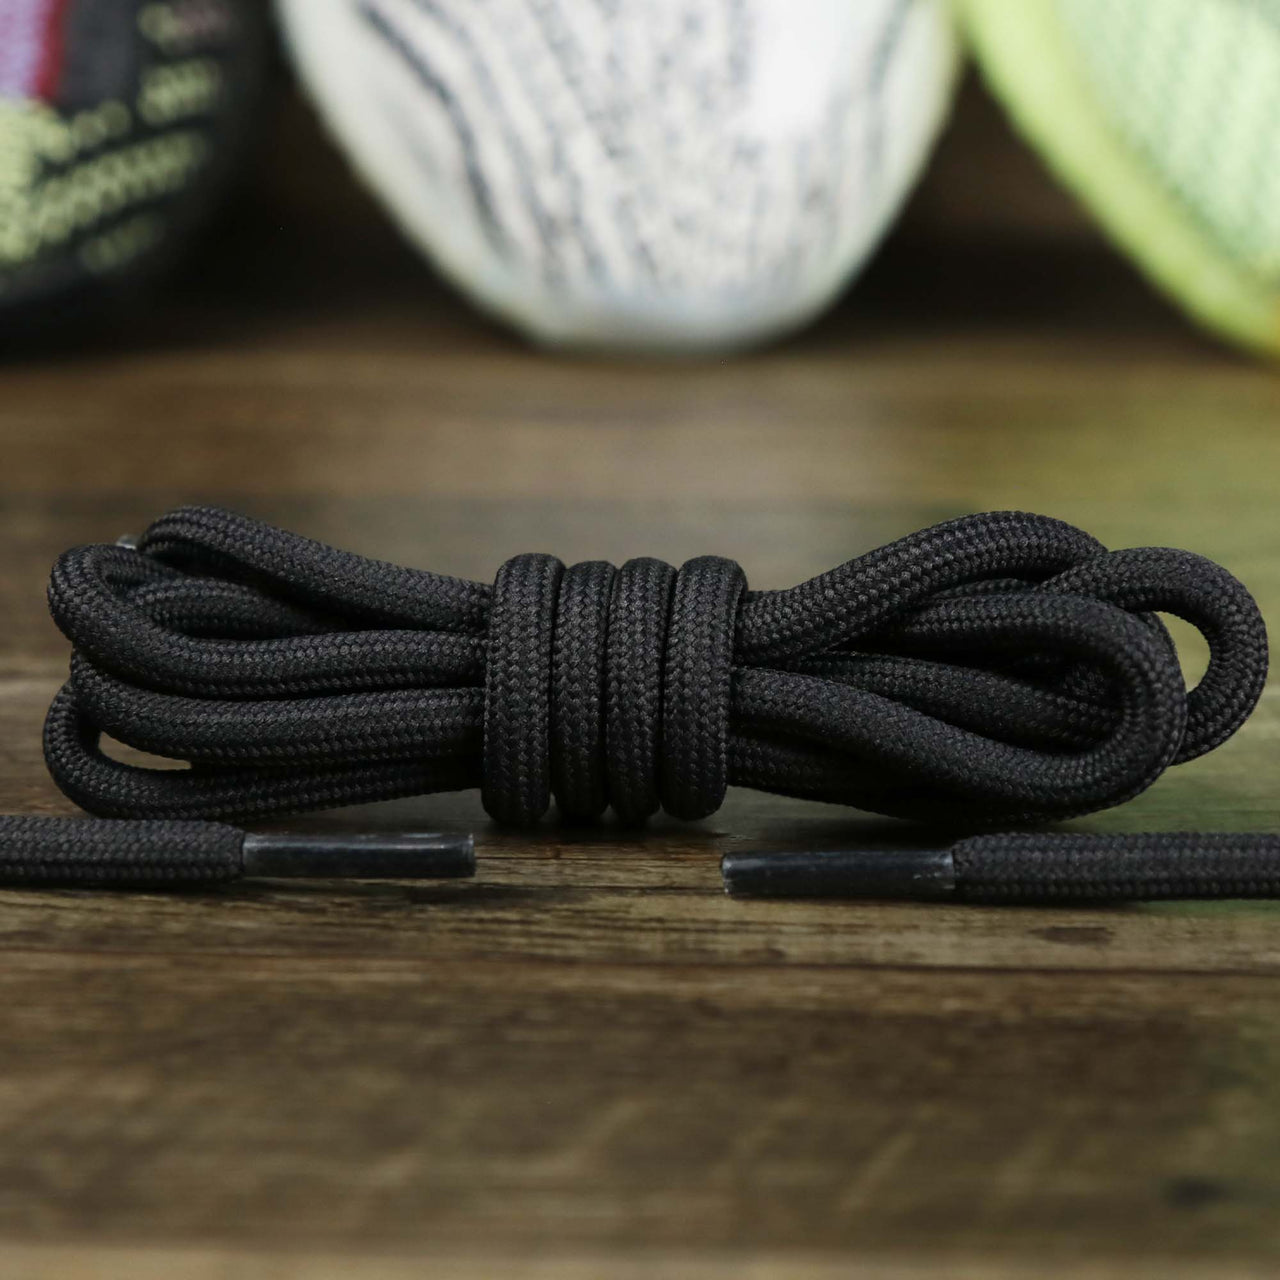 The Solid Rope Gunmetal Shoelaces with Gunmetal Aglets | 120cm Capswag folded up